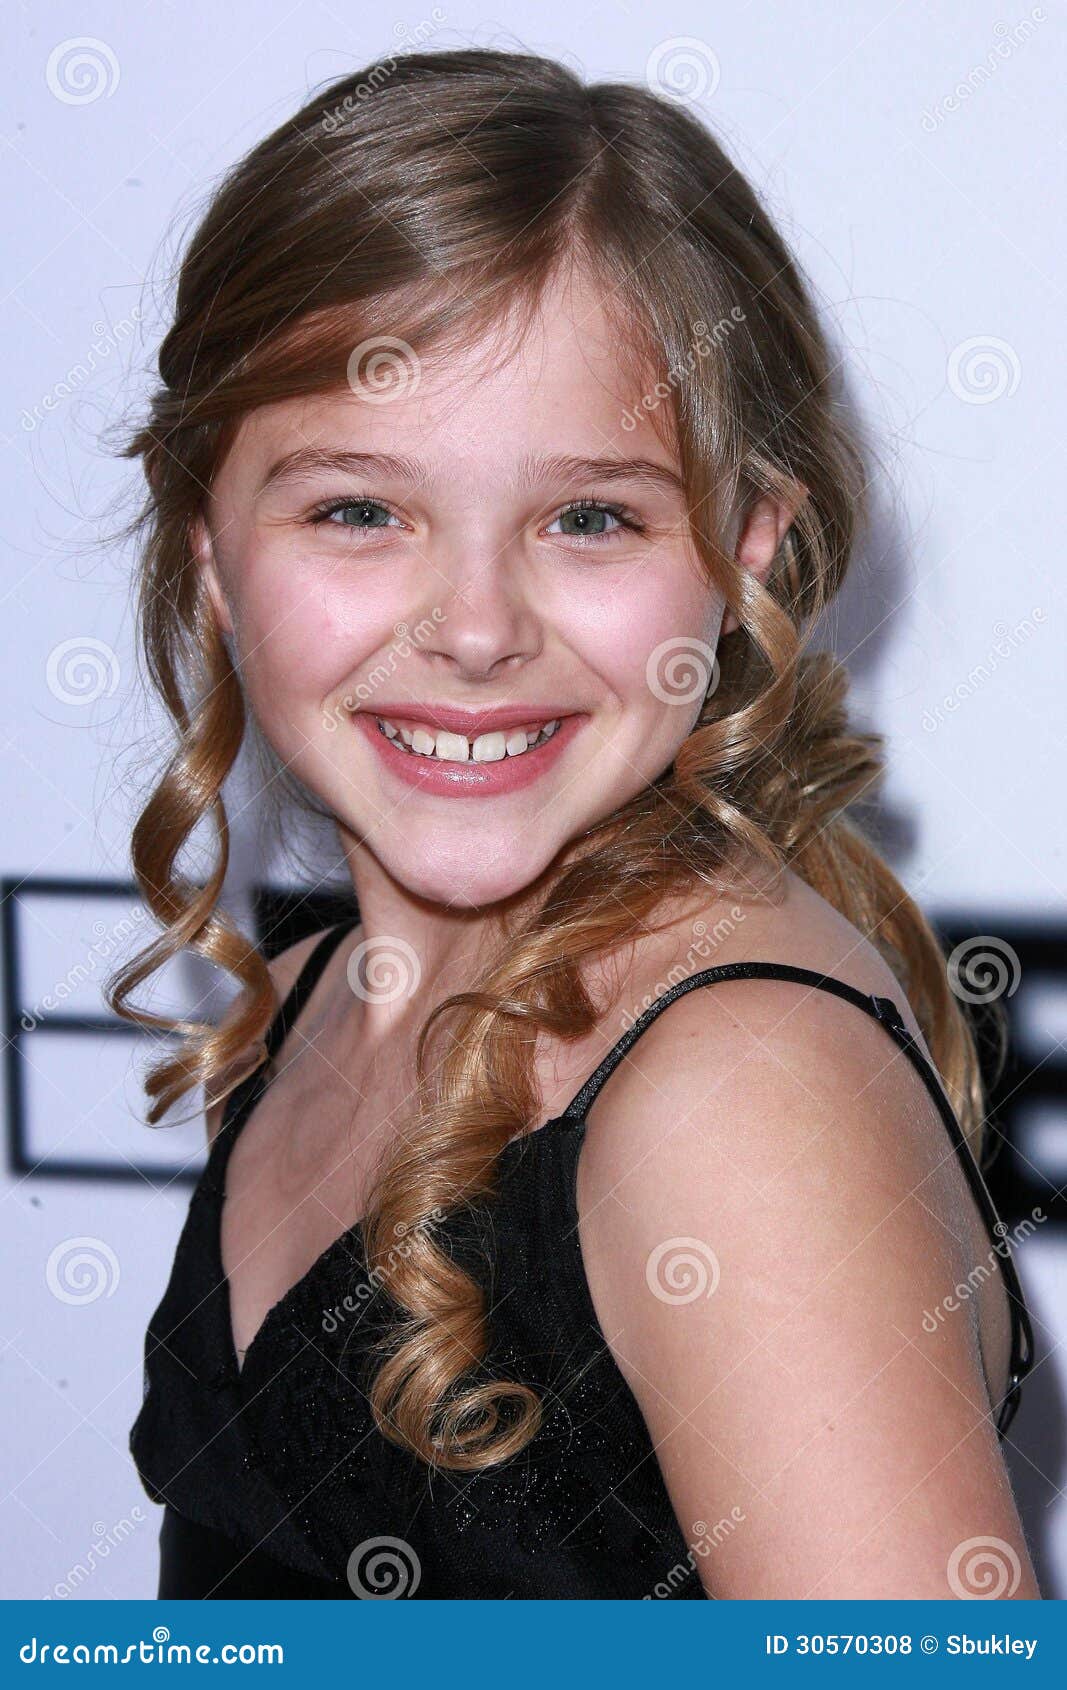 Chloë Grace Moretz  If You're Looking For Celebrities, They Were